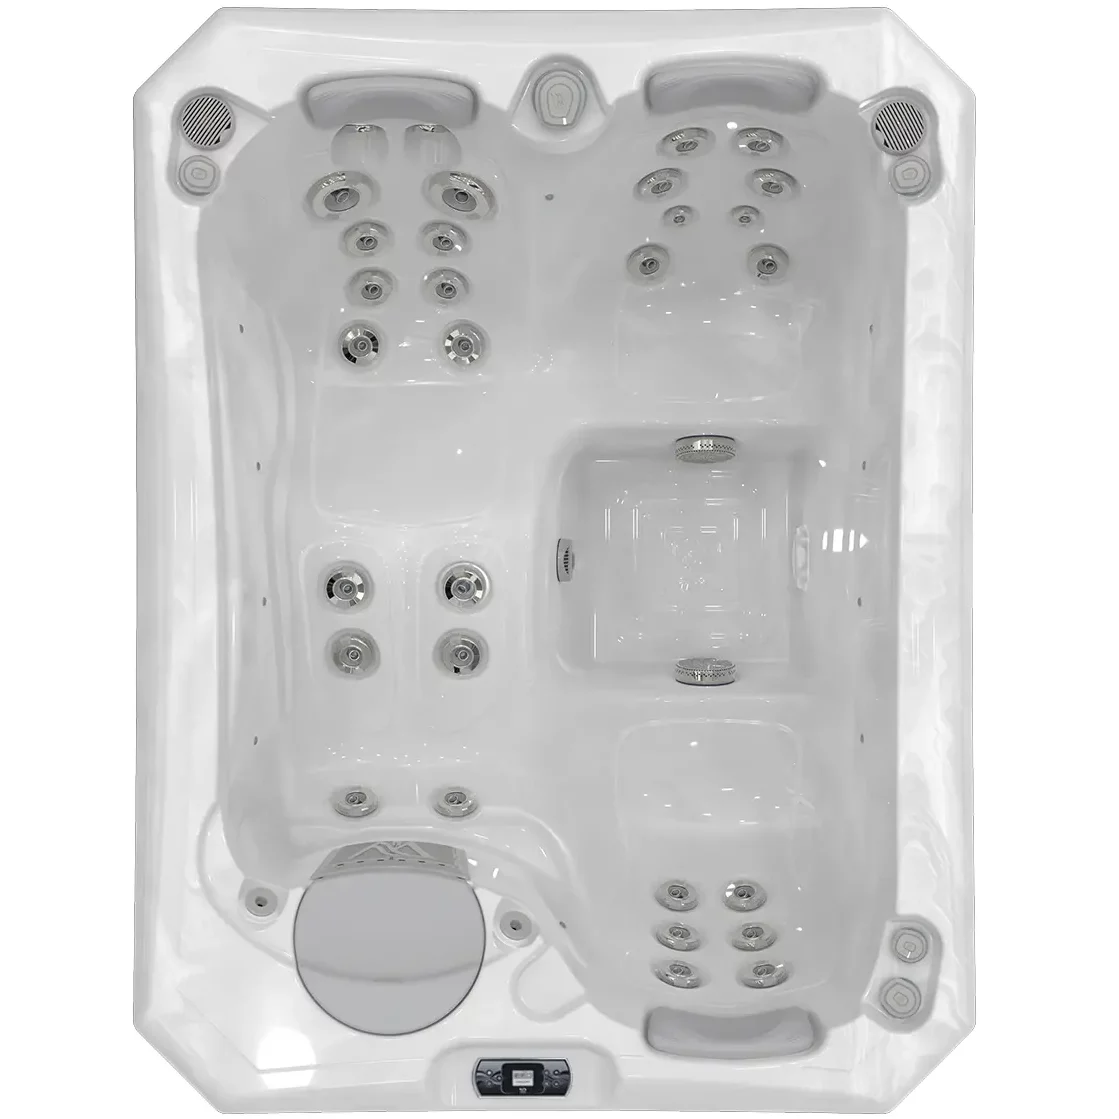 Manhattan Life Hot Tub, the smallest hot tub for sale